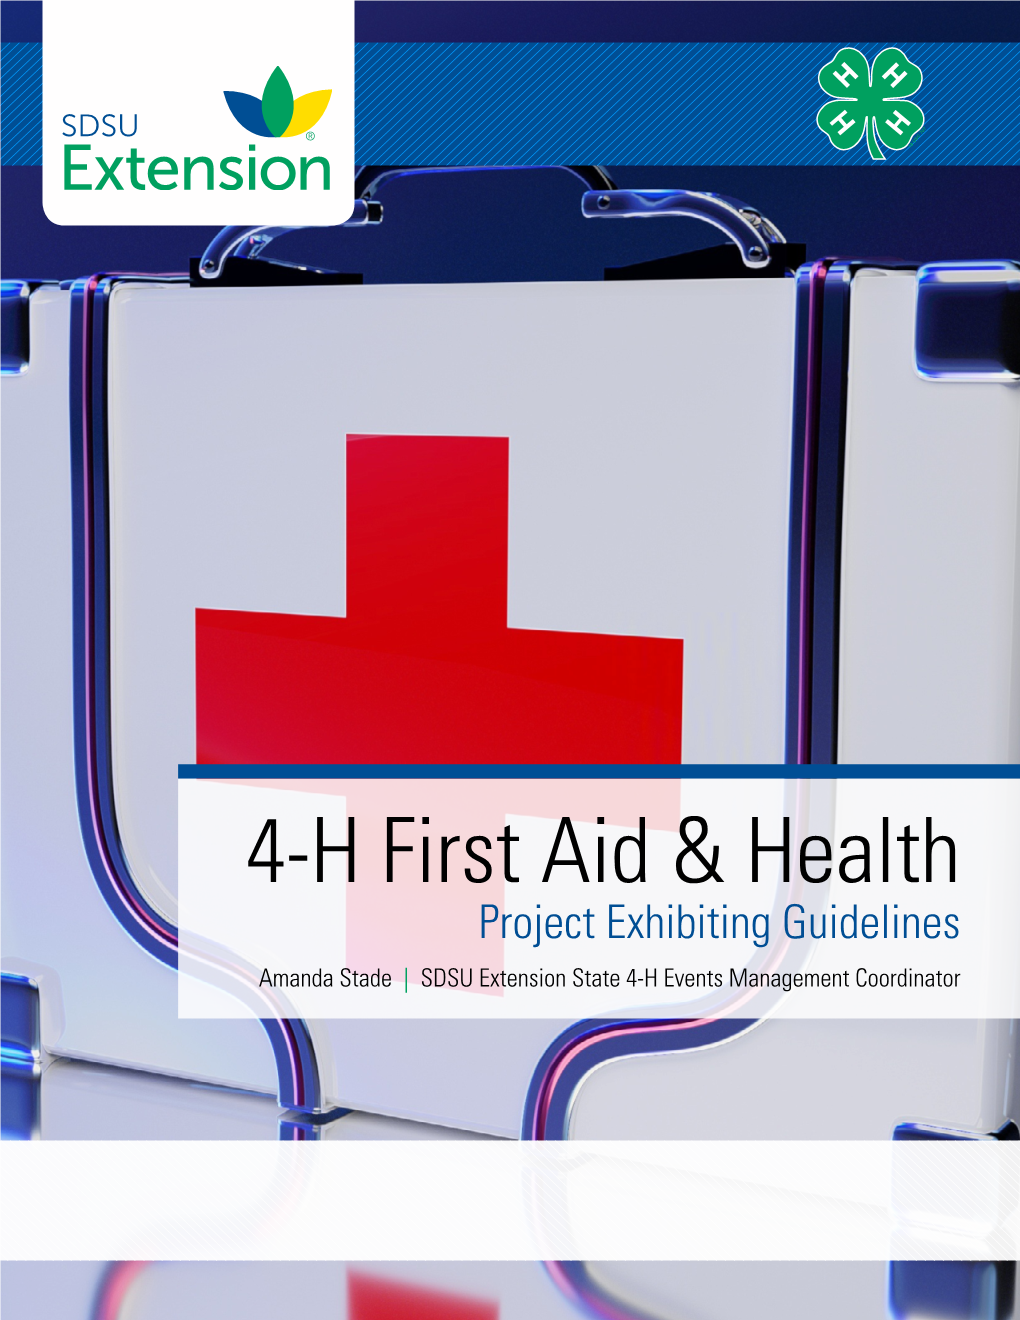 4-H First Aid & Health Project Exhibiting Guidelines